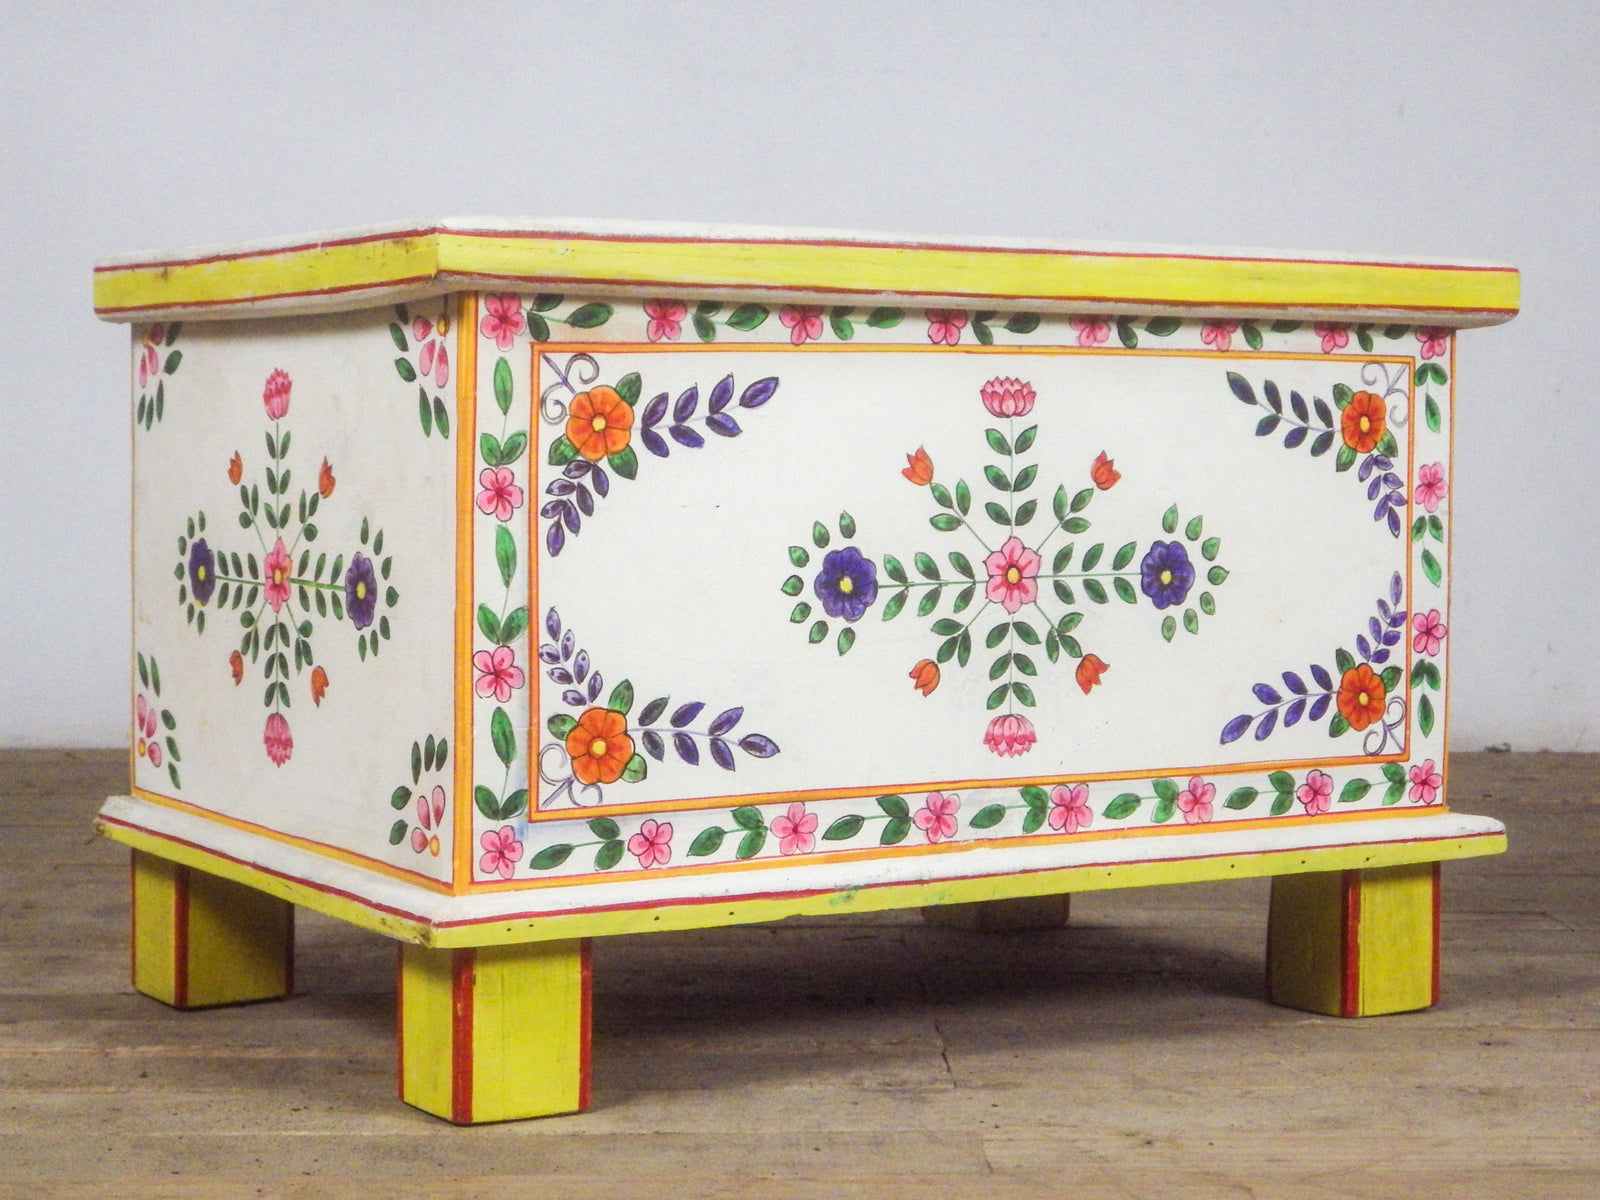 MILL-1448/1 Wooden Hand Painted Chest C20